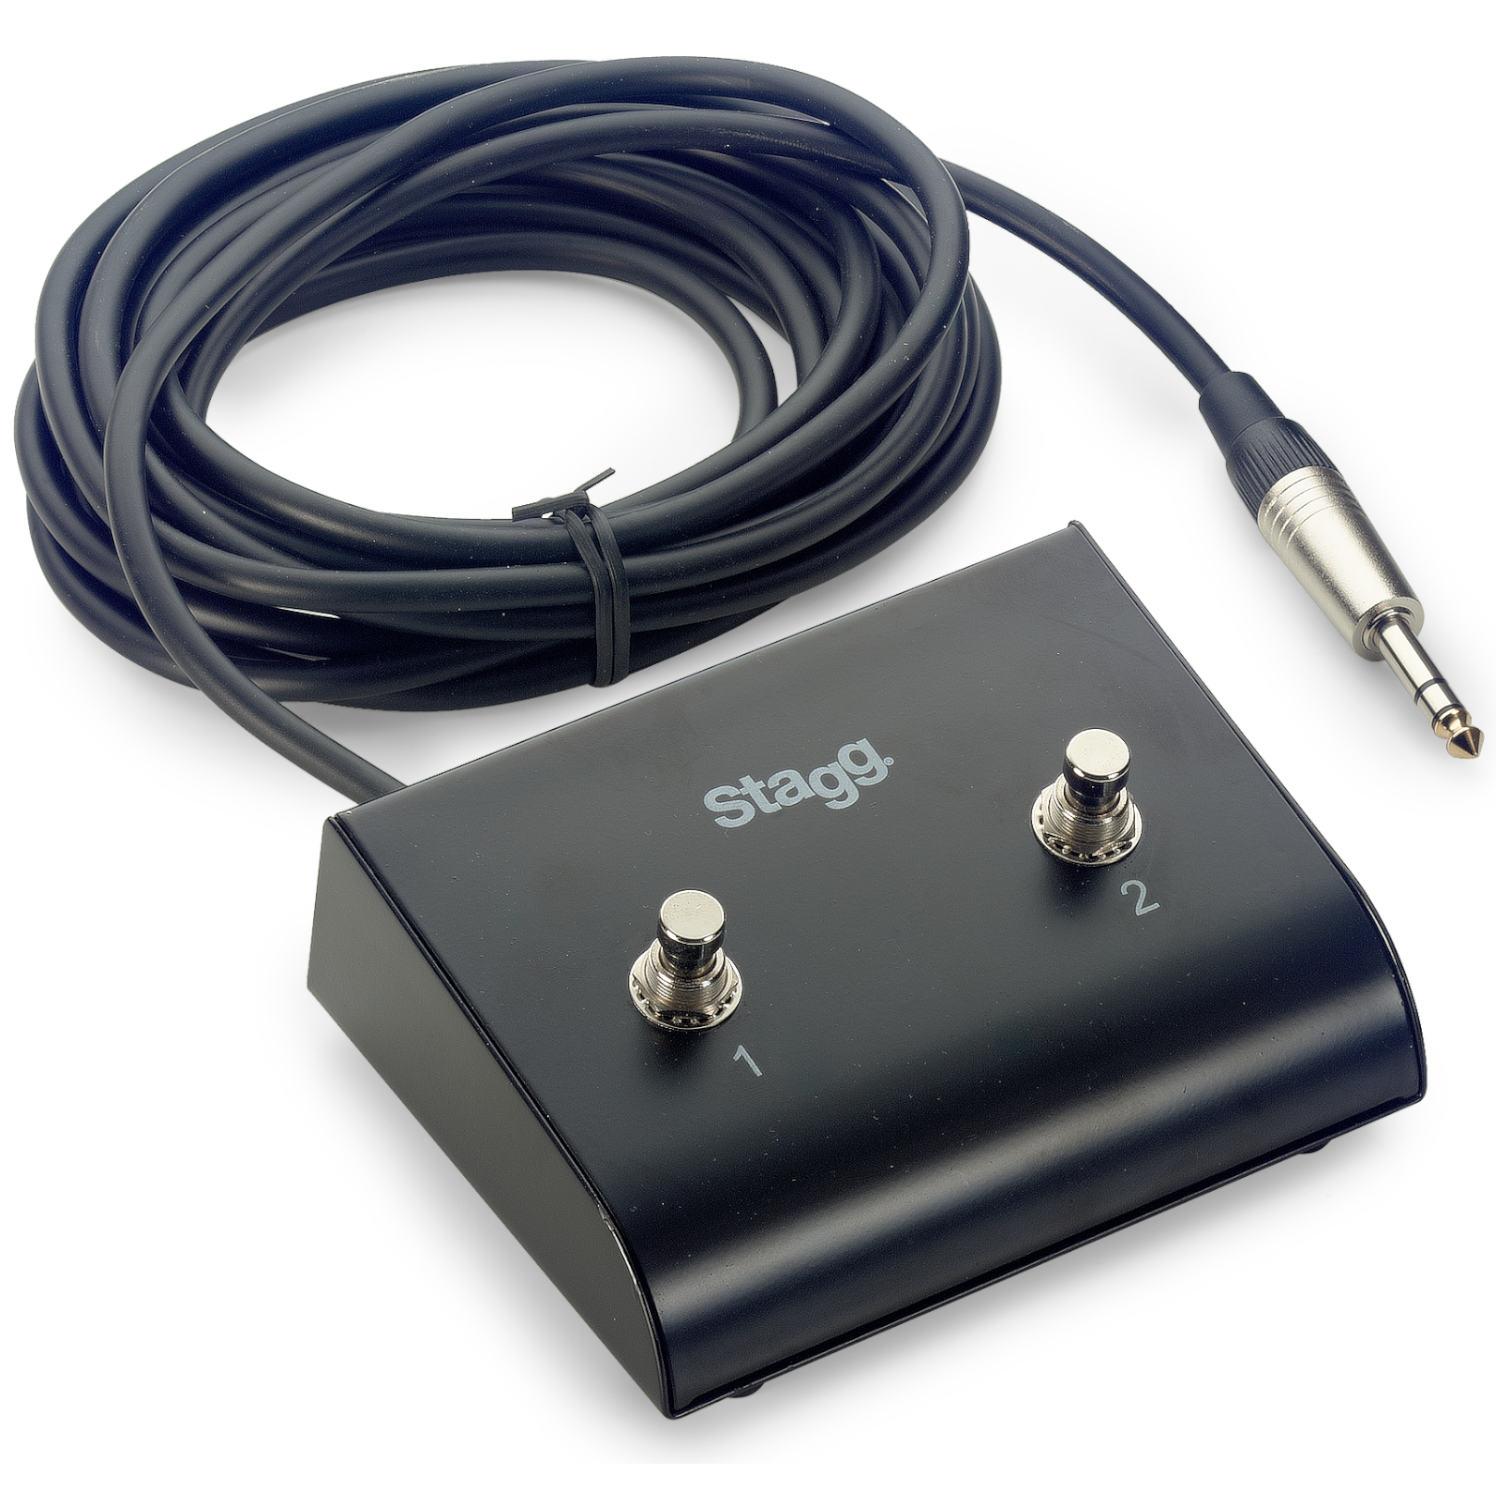 Stagg SSWB2 2-Button Footswitch with 5M Cable